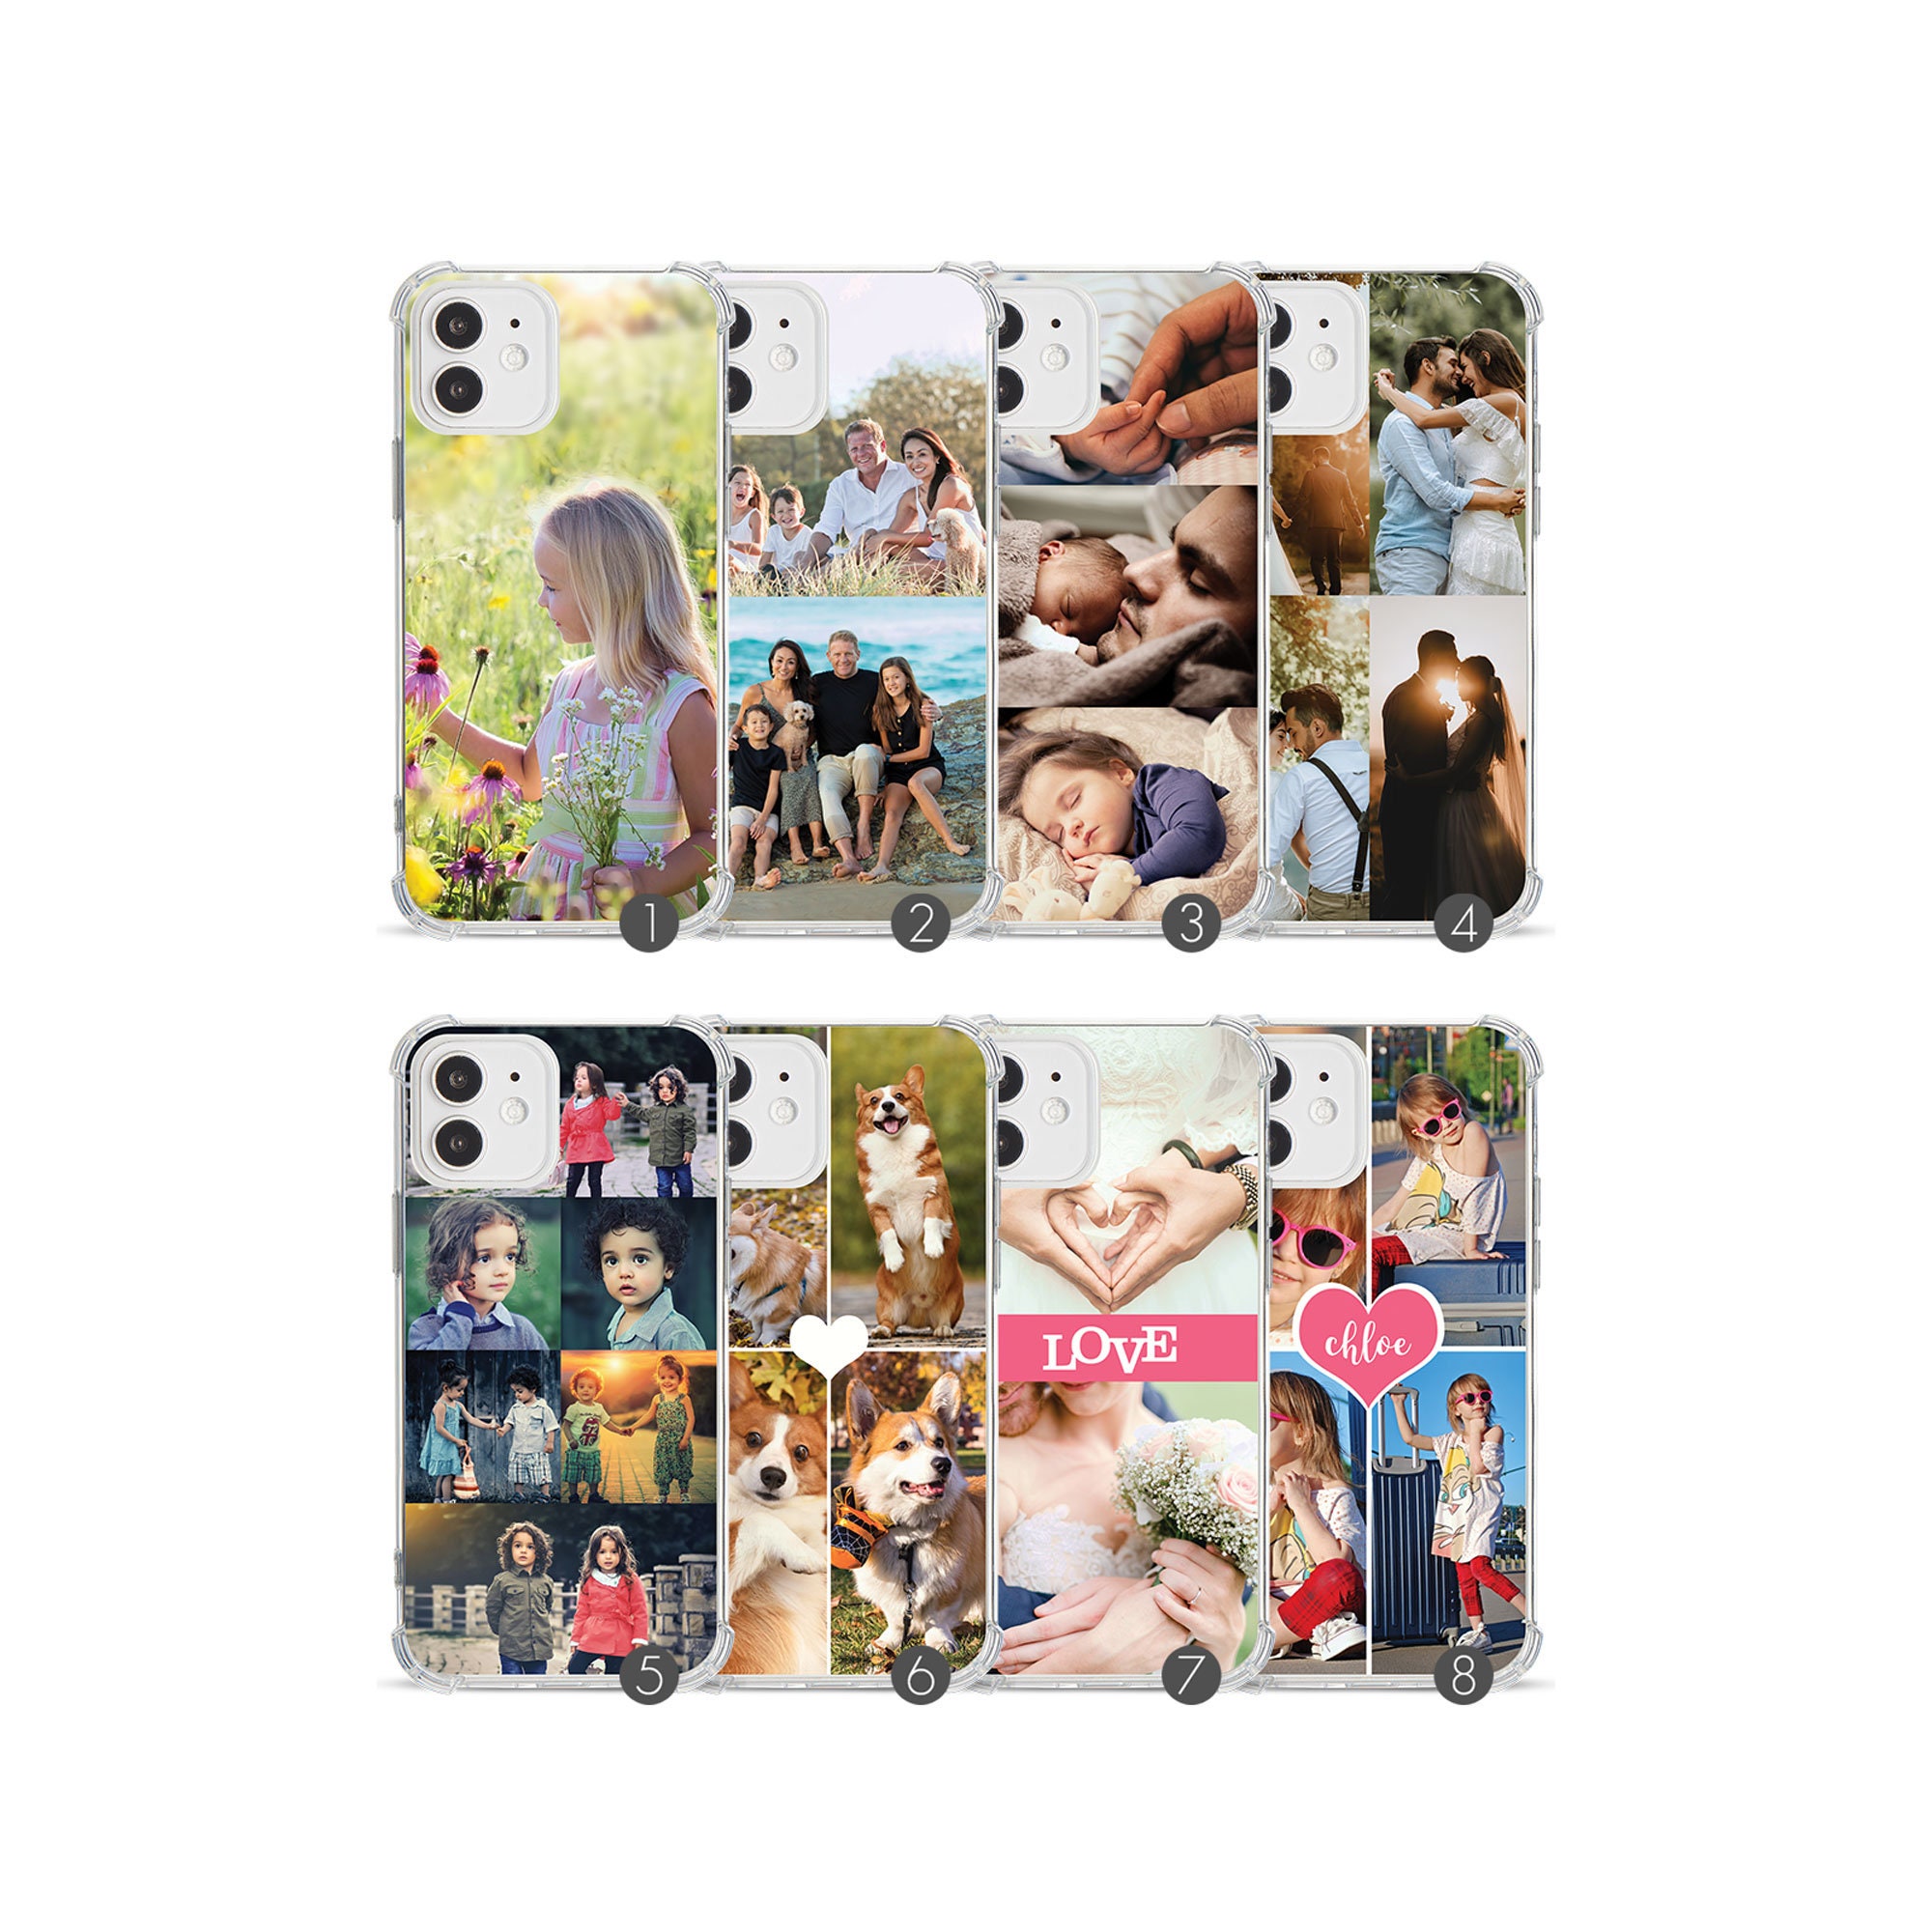 Personalized Custom Picture Image Photo Case for Samsung Galaxy S10 Plus /  S10 / S10e Design Your Own Custom Phone Case 